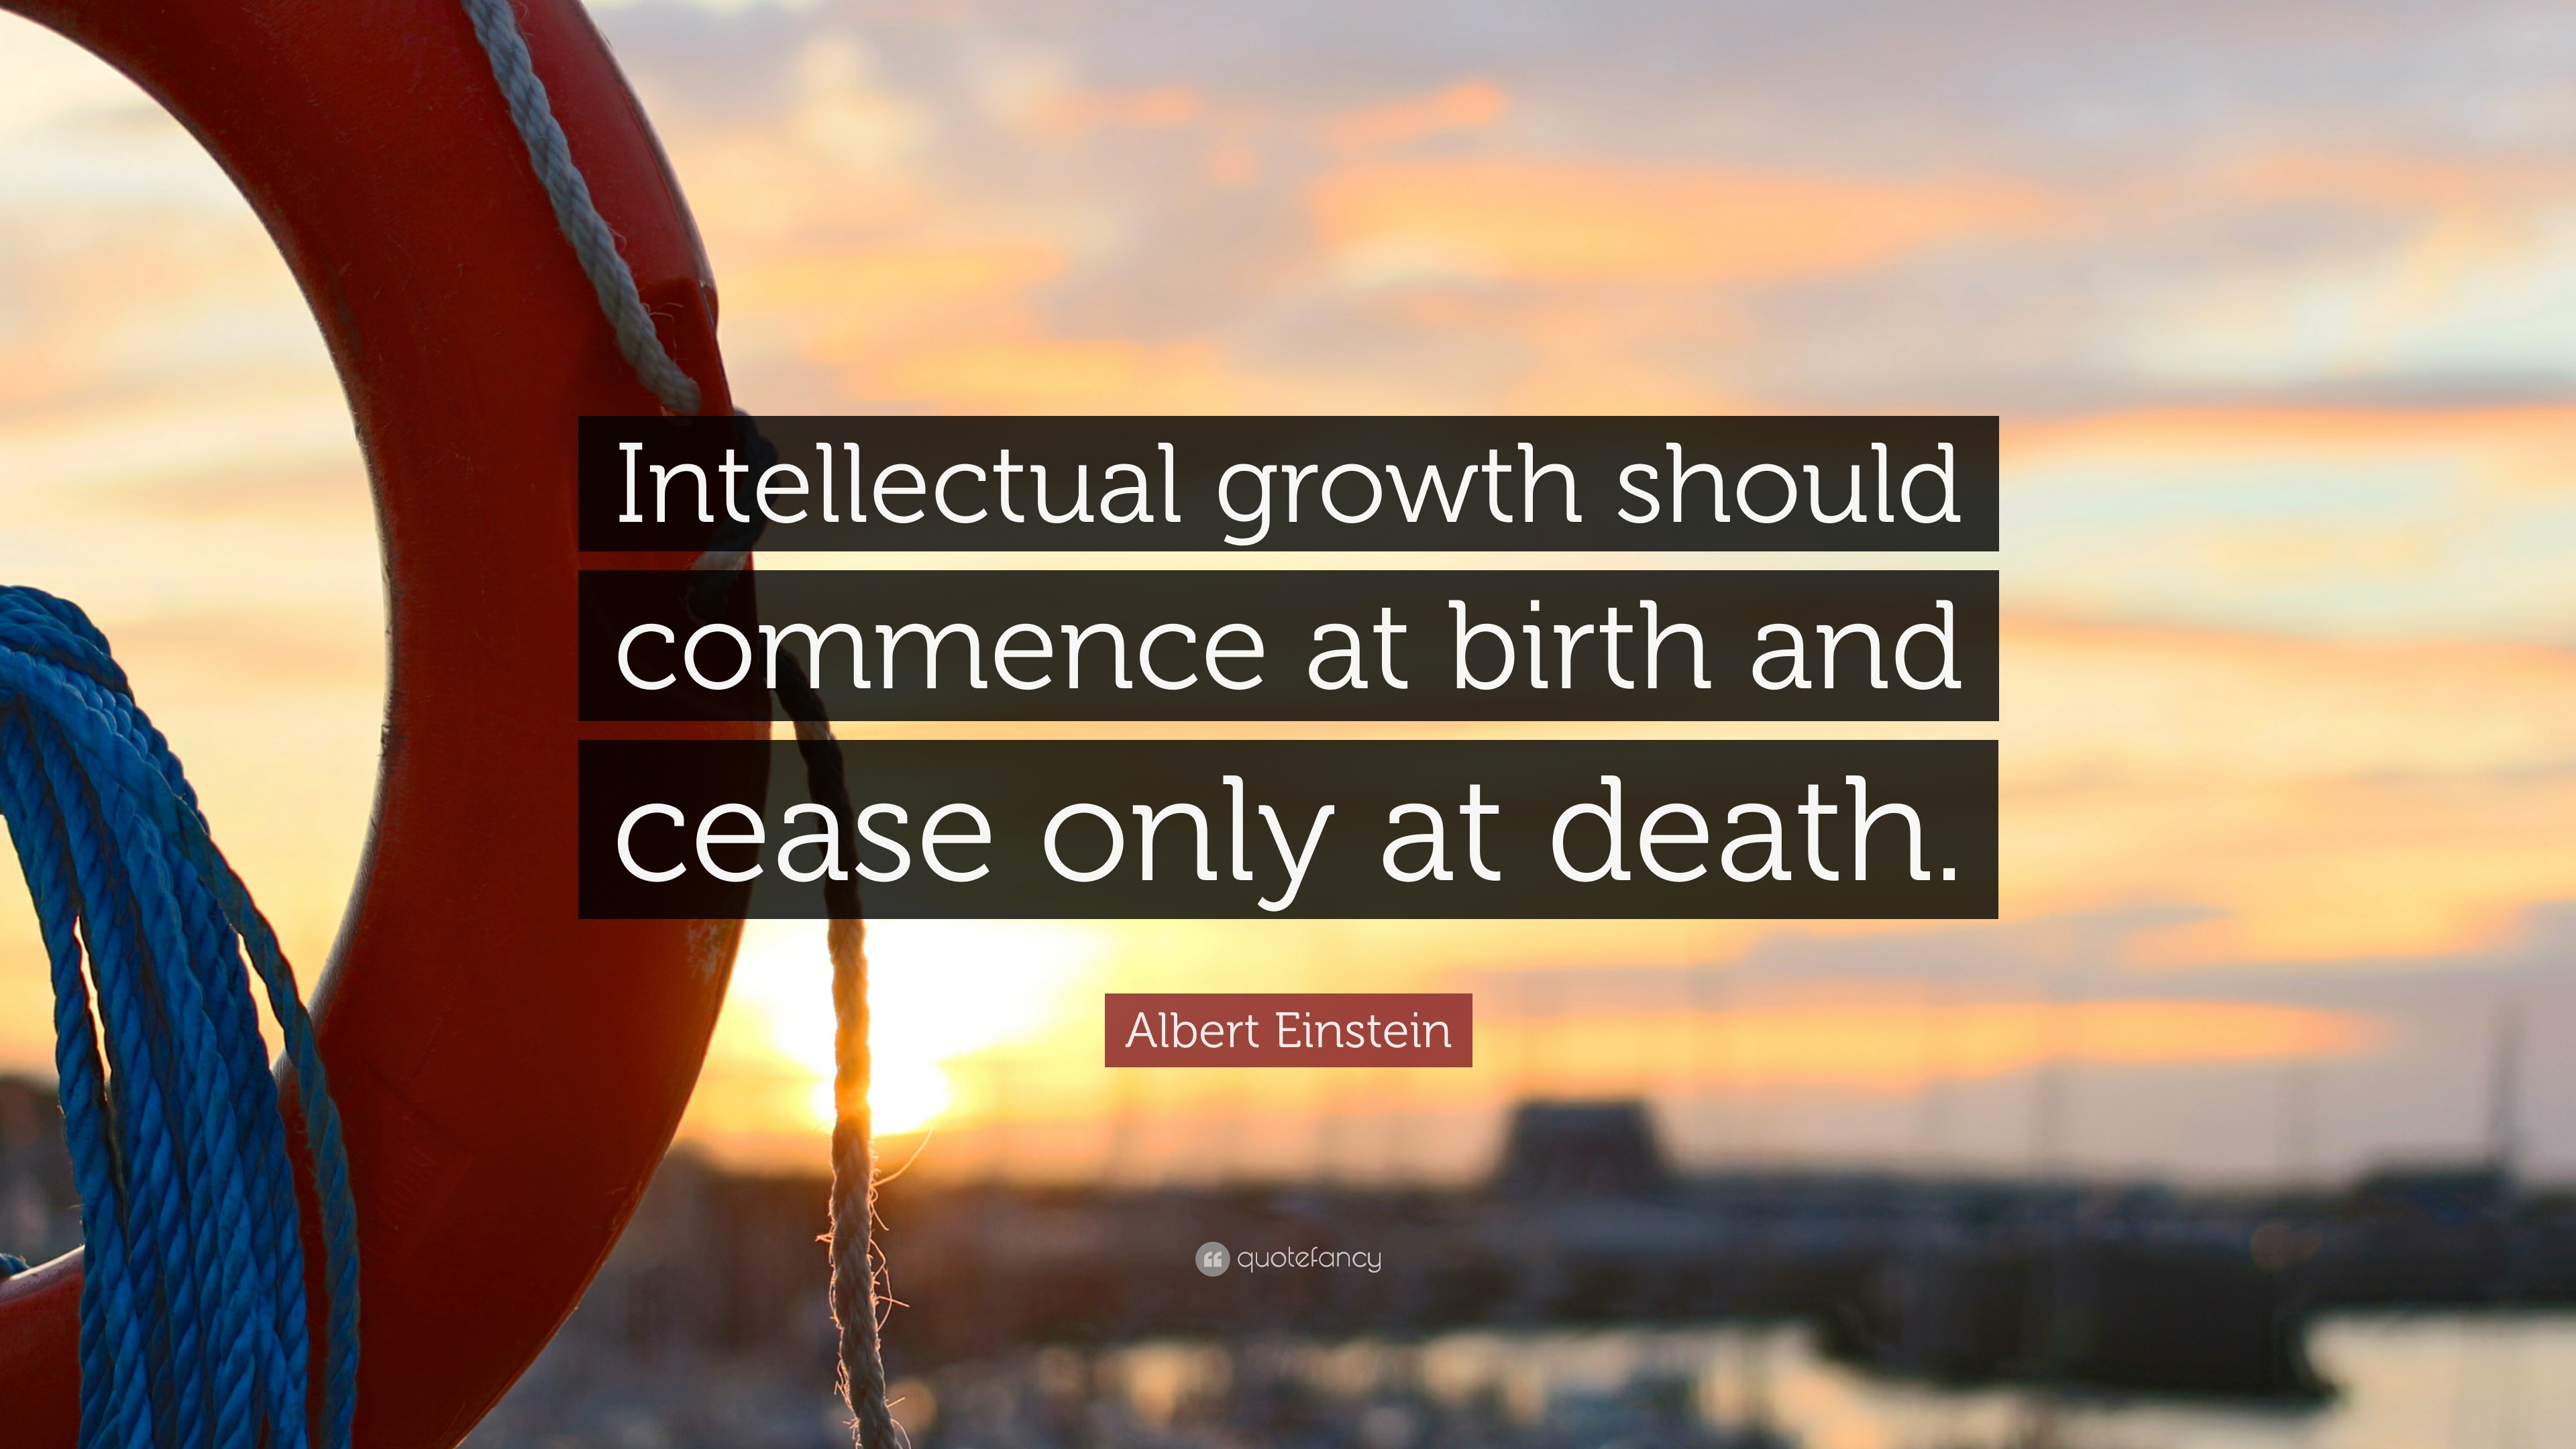 Albert Einstein Quote “Intellectual growth should mence at birth and cease only at